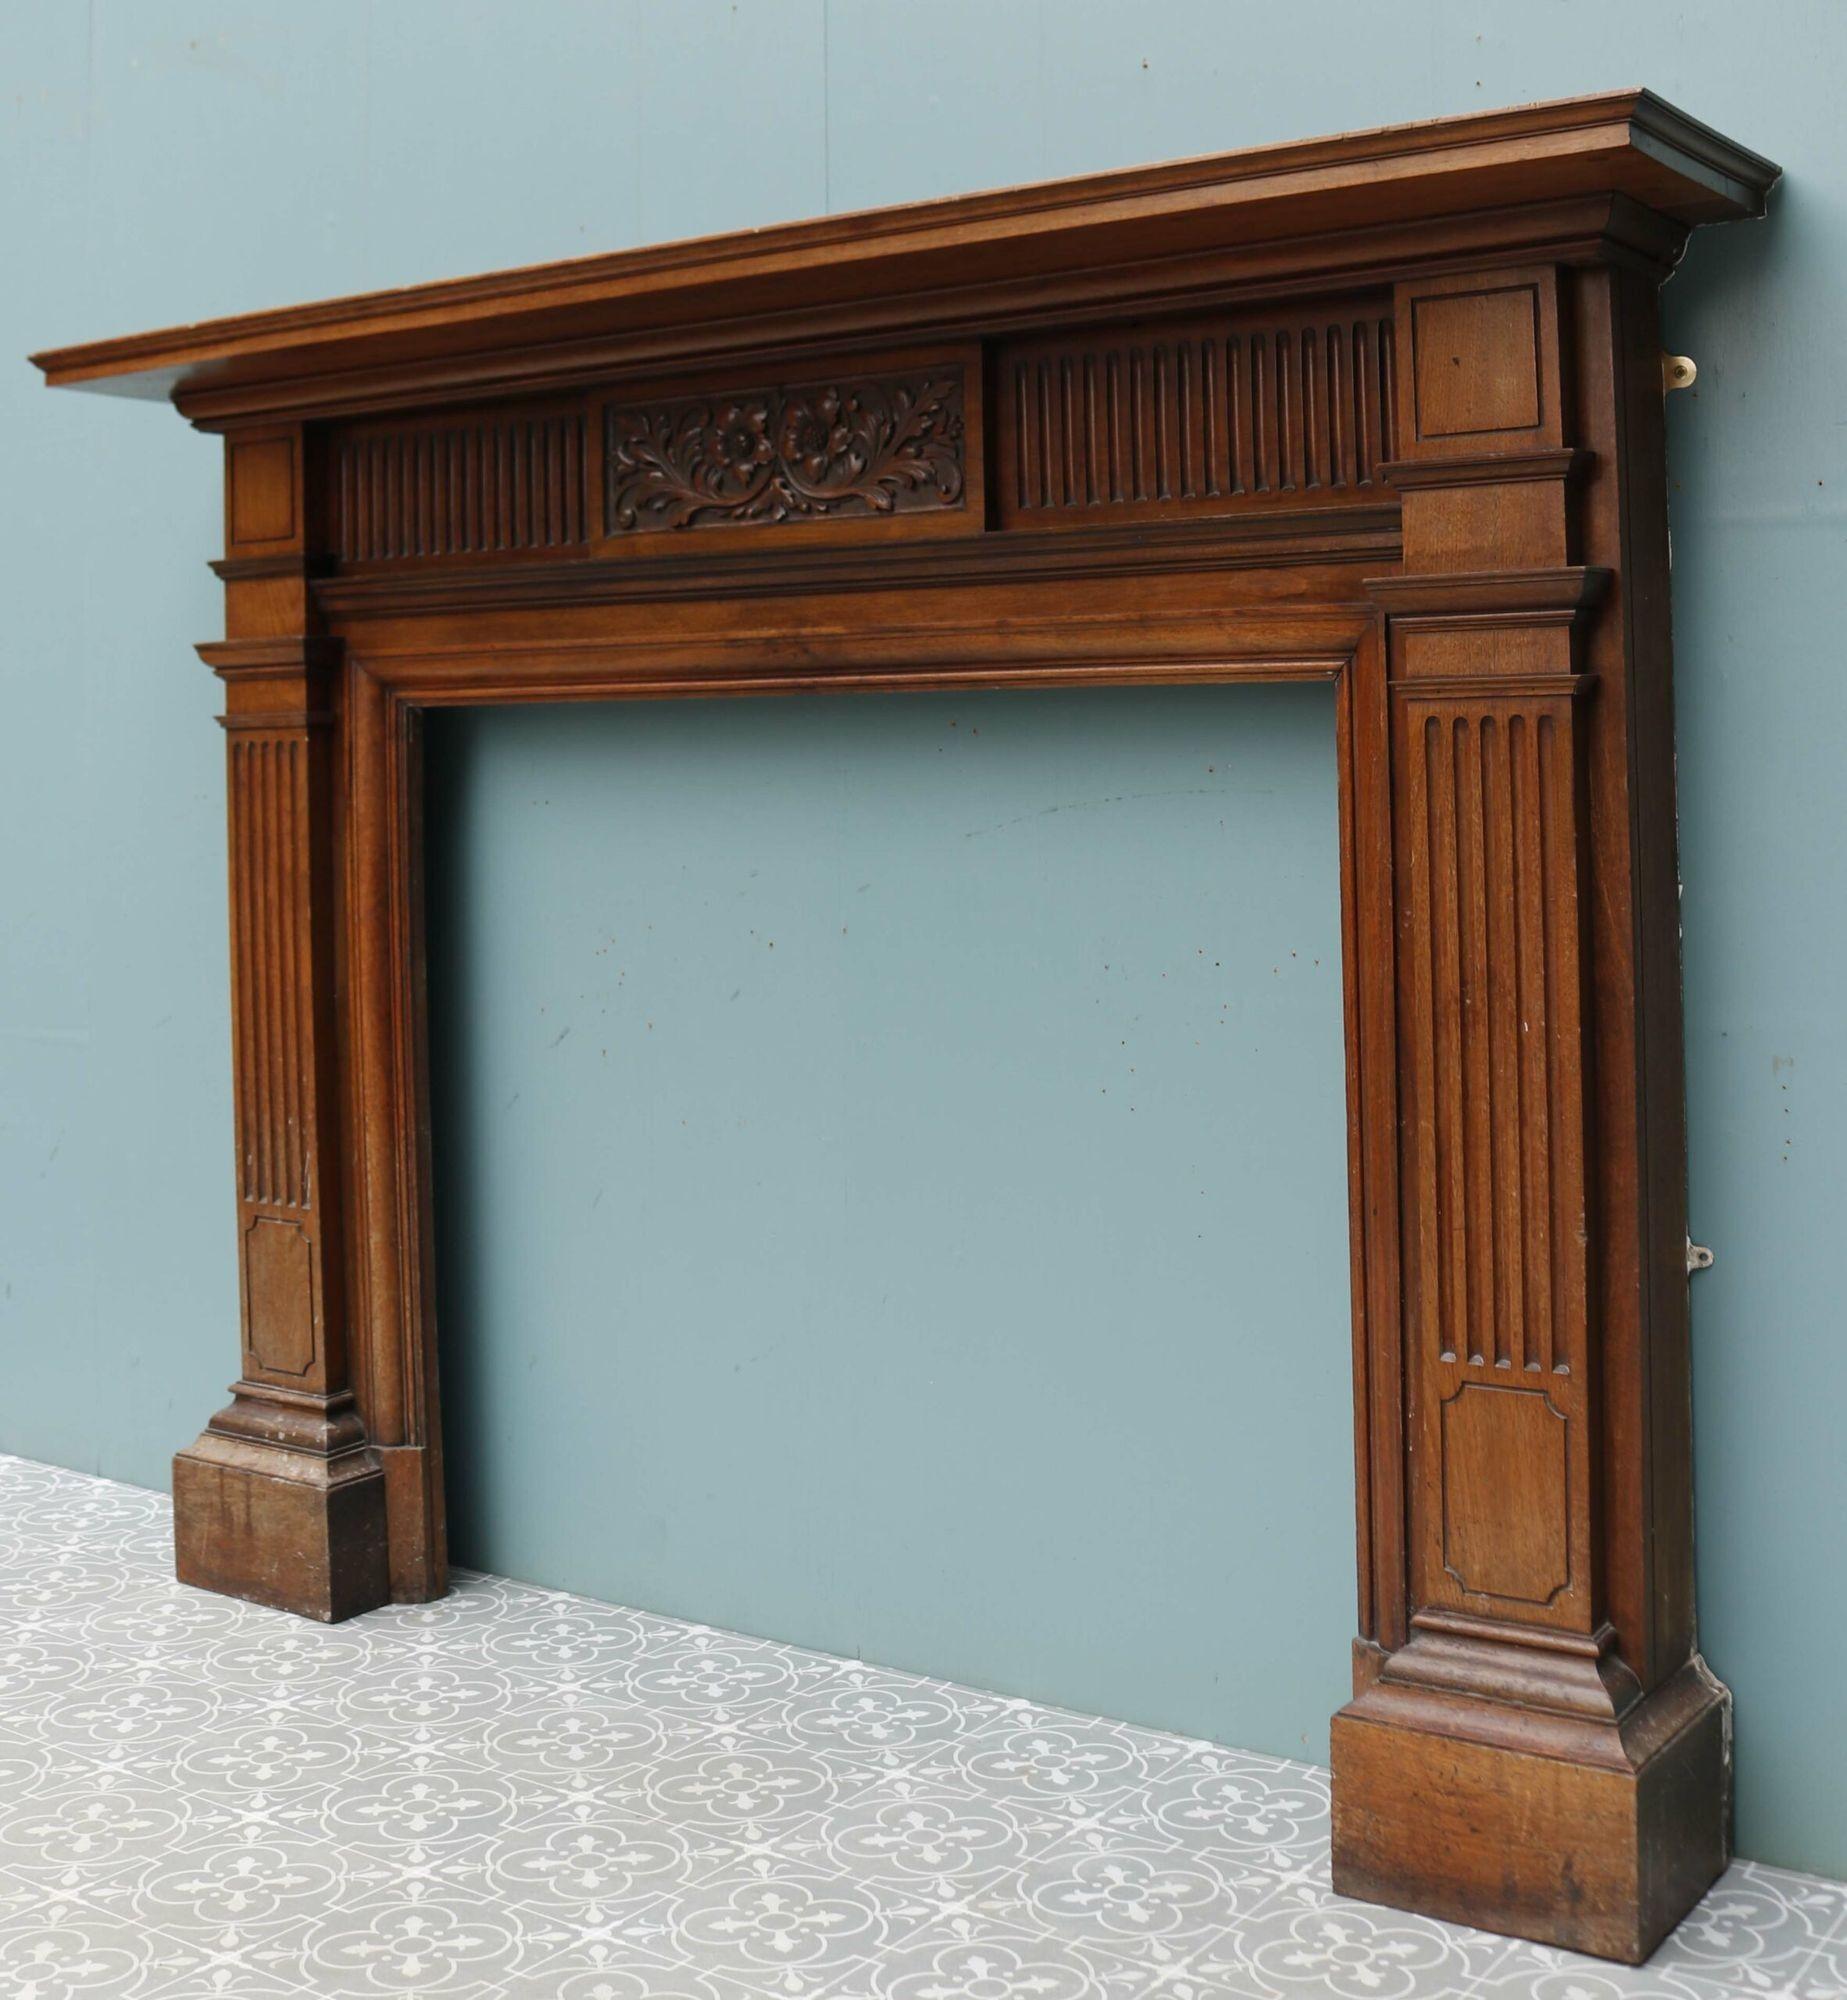 Antique Victorian Carved Timber Fire Mantel In Fair Condition For Sale In Wormelow, Herefordshire